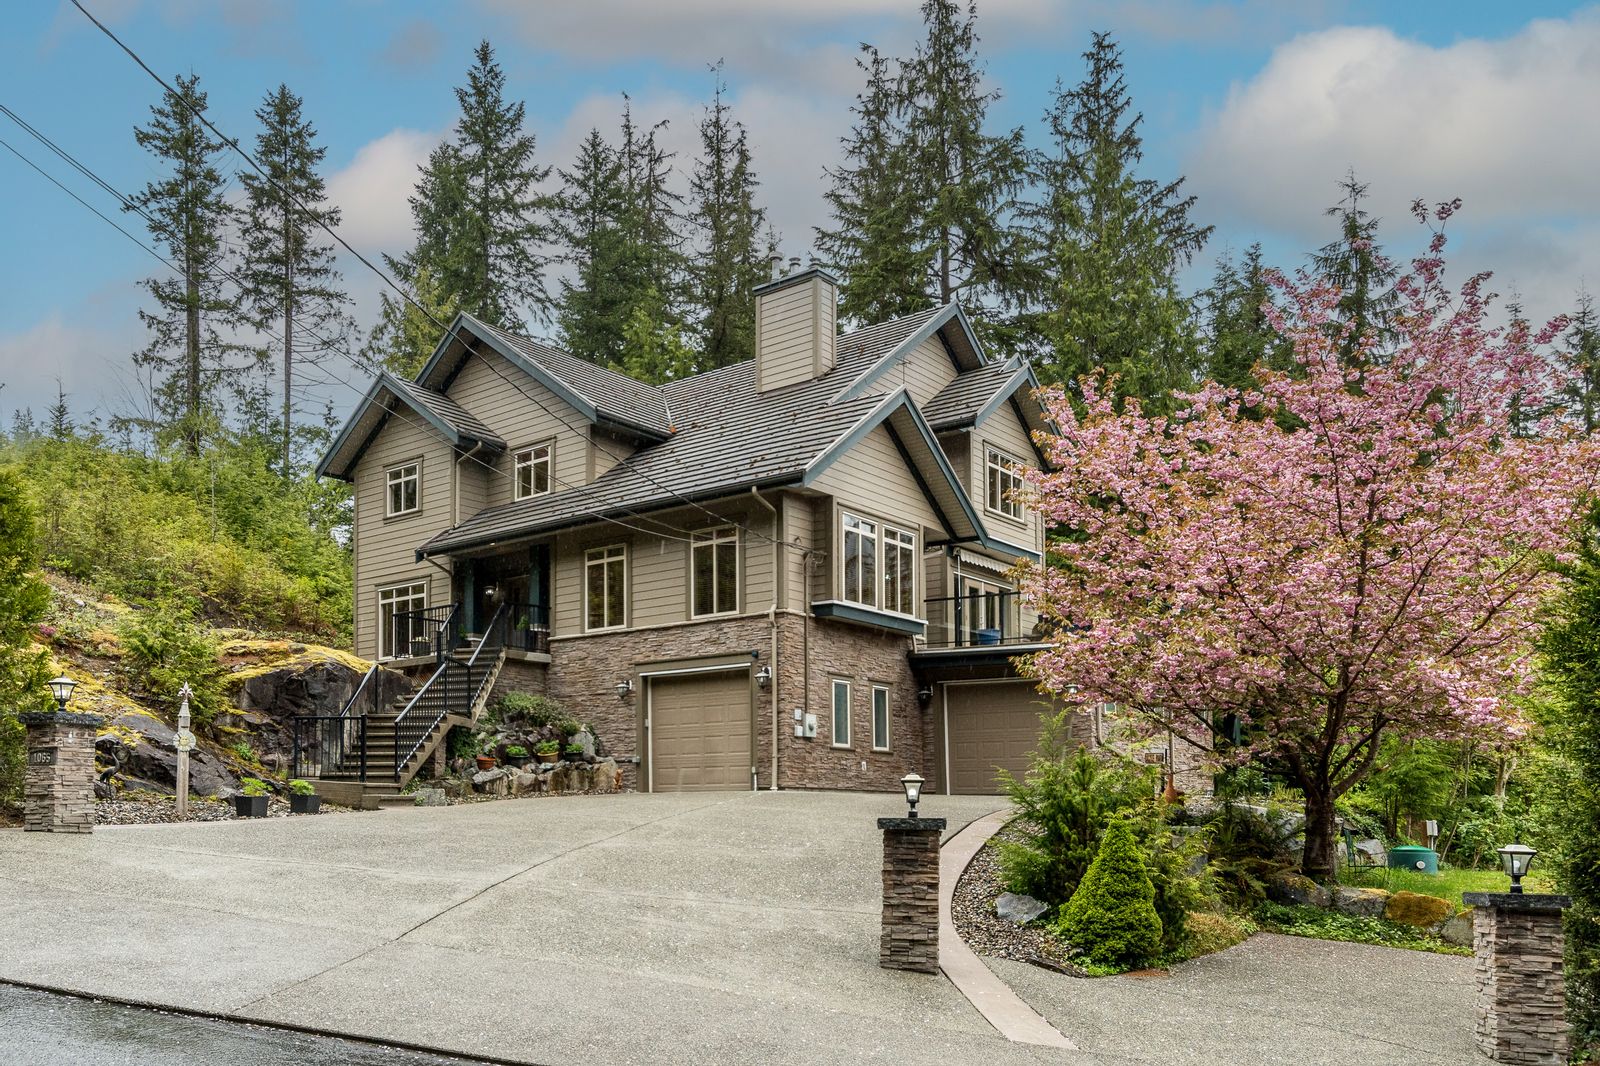 1065 Uplands Drive Anmore Port Moody BC Listed for Sale at $2,595,000.00